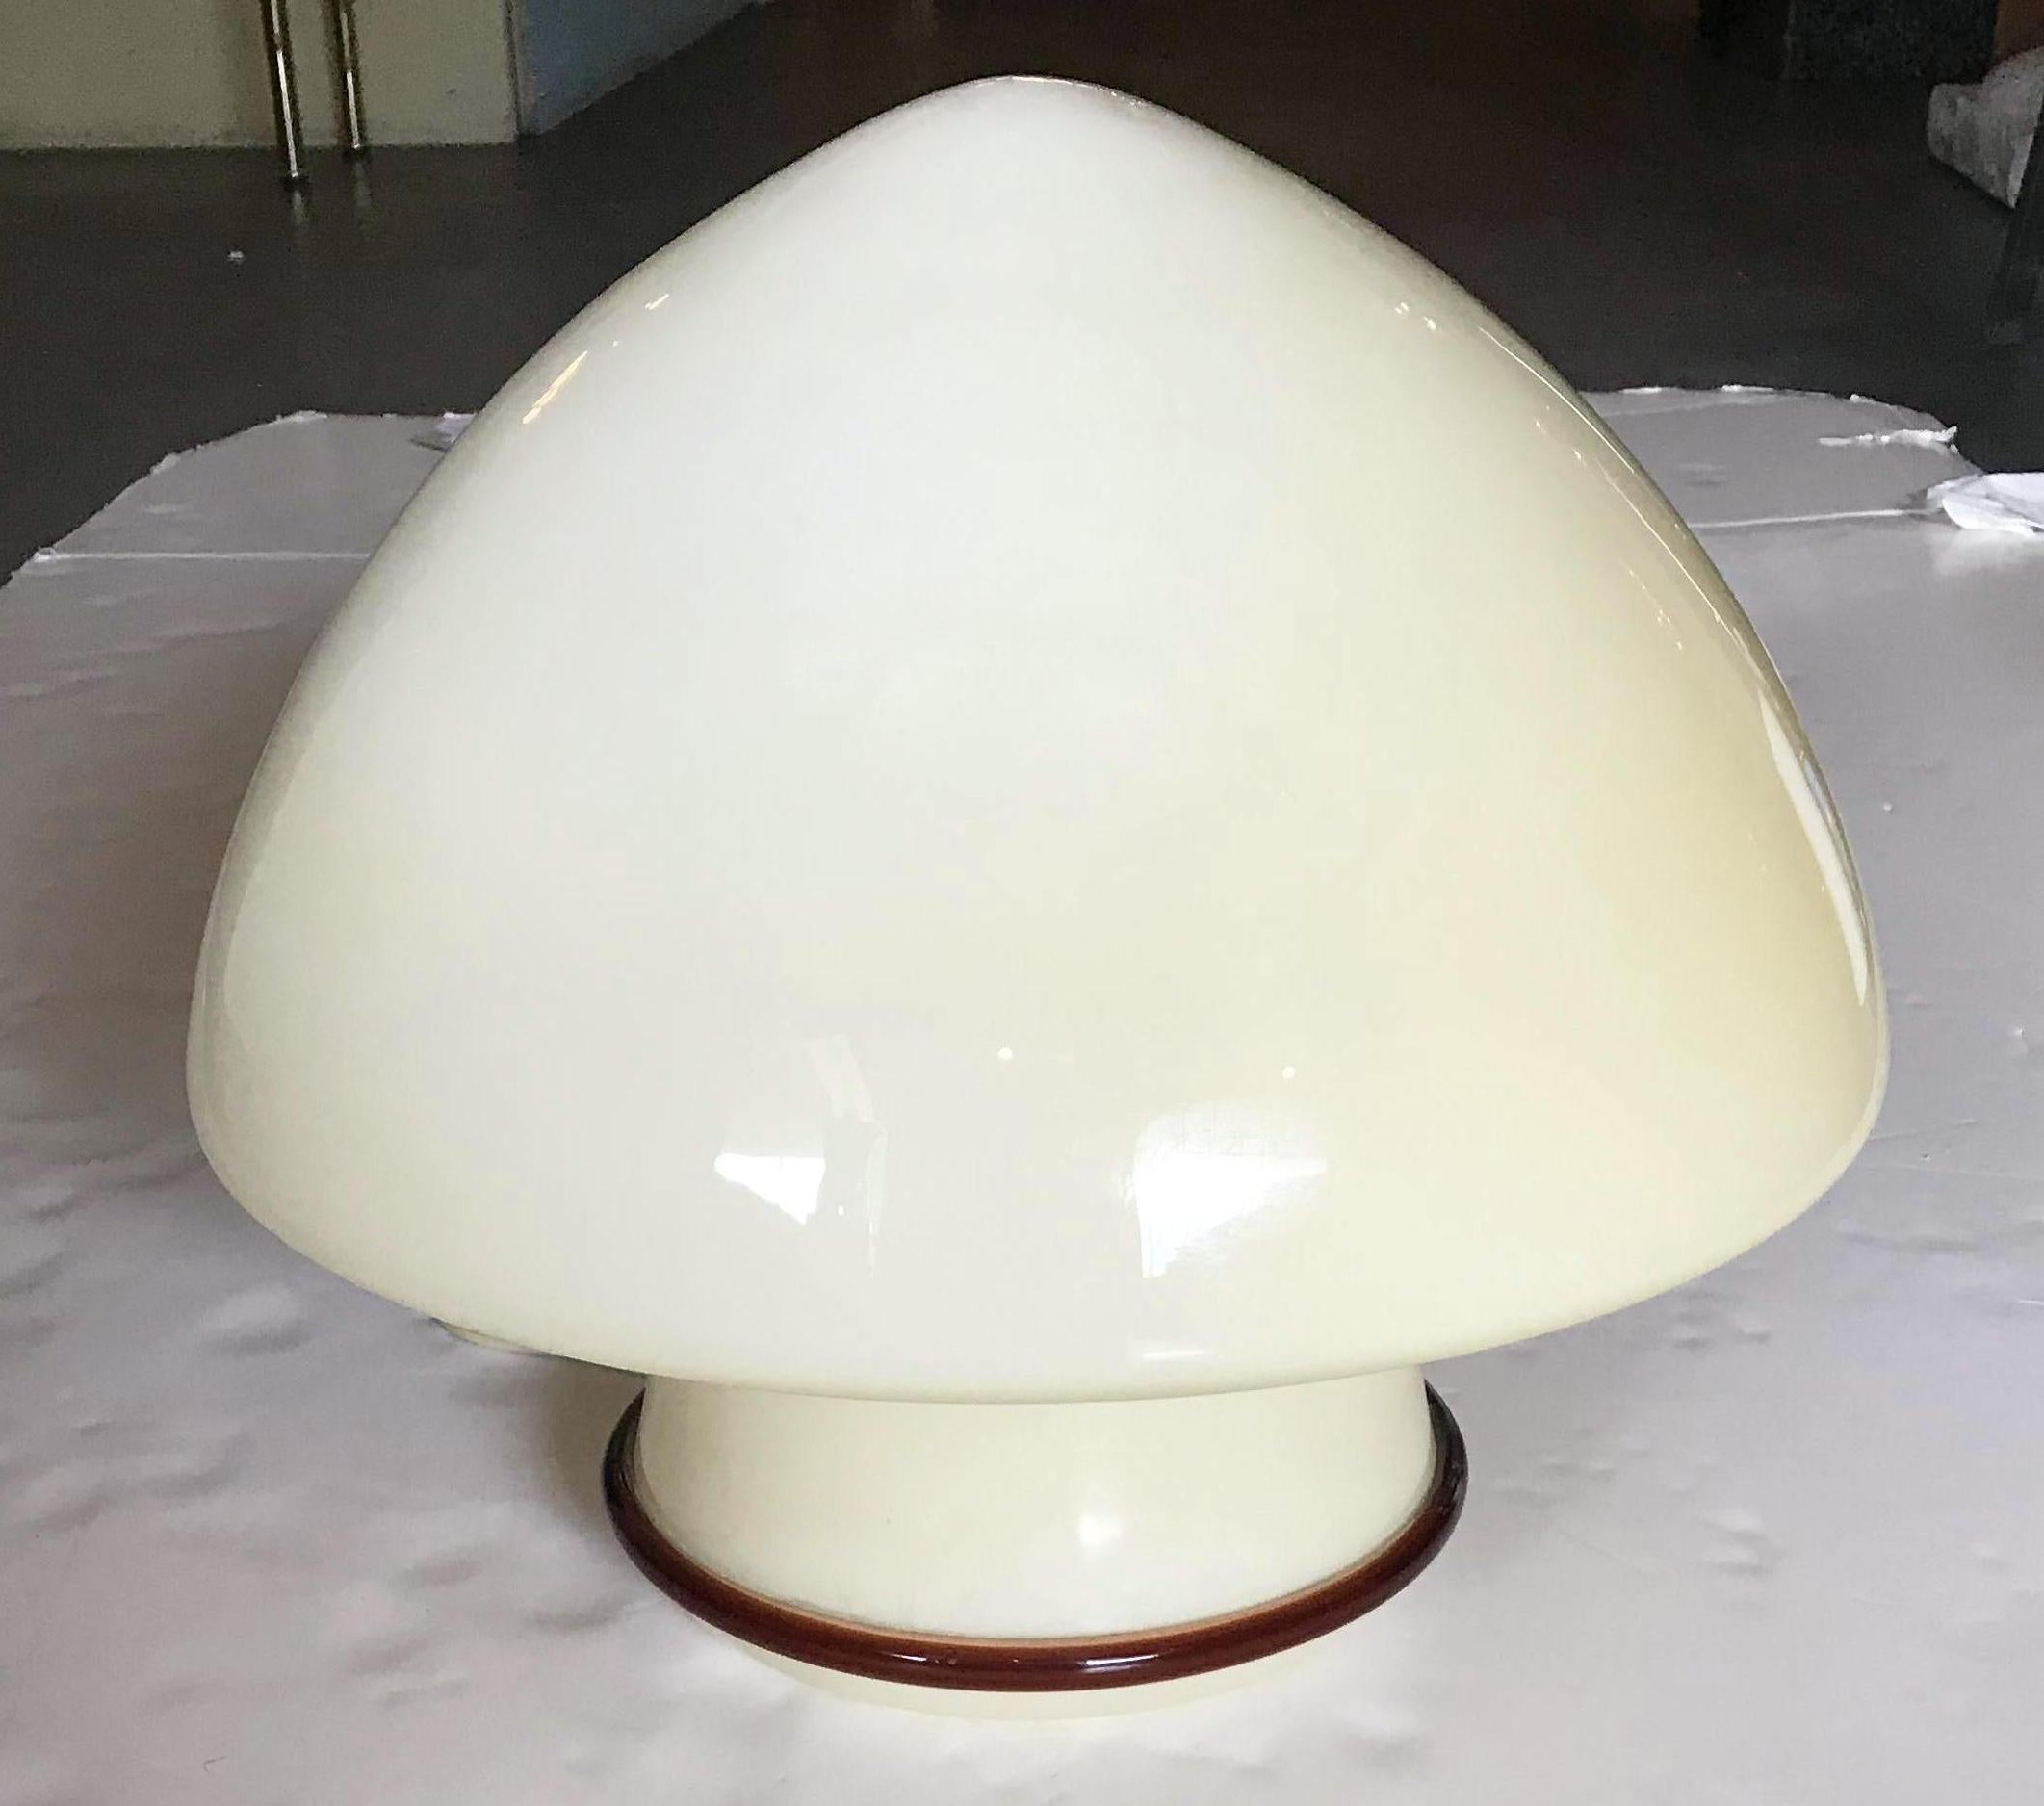 Vintage Italian cream colored Murano glass table lamp with a dark amber glass edge / Designed by De Majo circa 1960's / Made in Italy / Original label on the glass
1 light / E26 or E27 type / max 60W
Diameter: 16 inches / Height: 15 inches
1 in